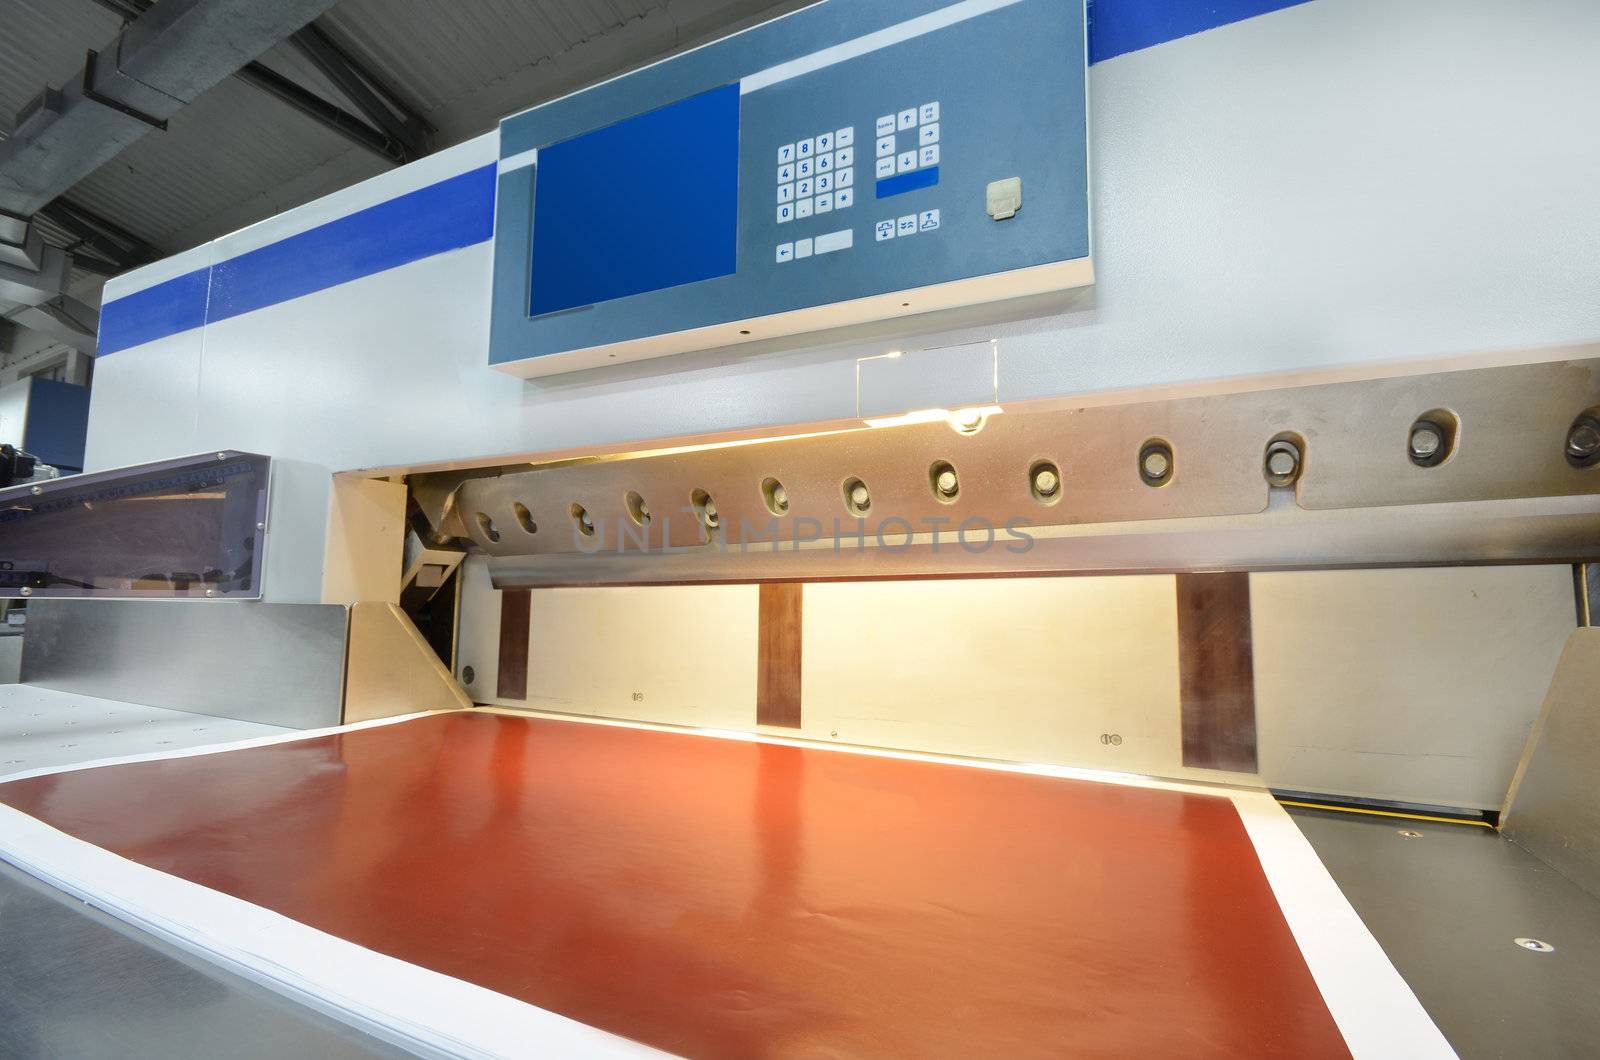 Front view of a modern paper guillotine with touch screen used in commercial printing industry (industrial knife cutter)